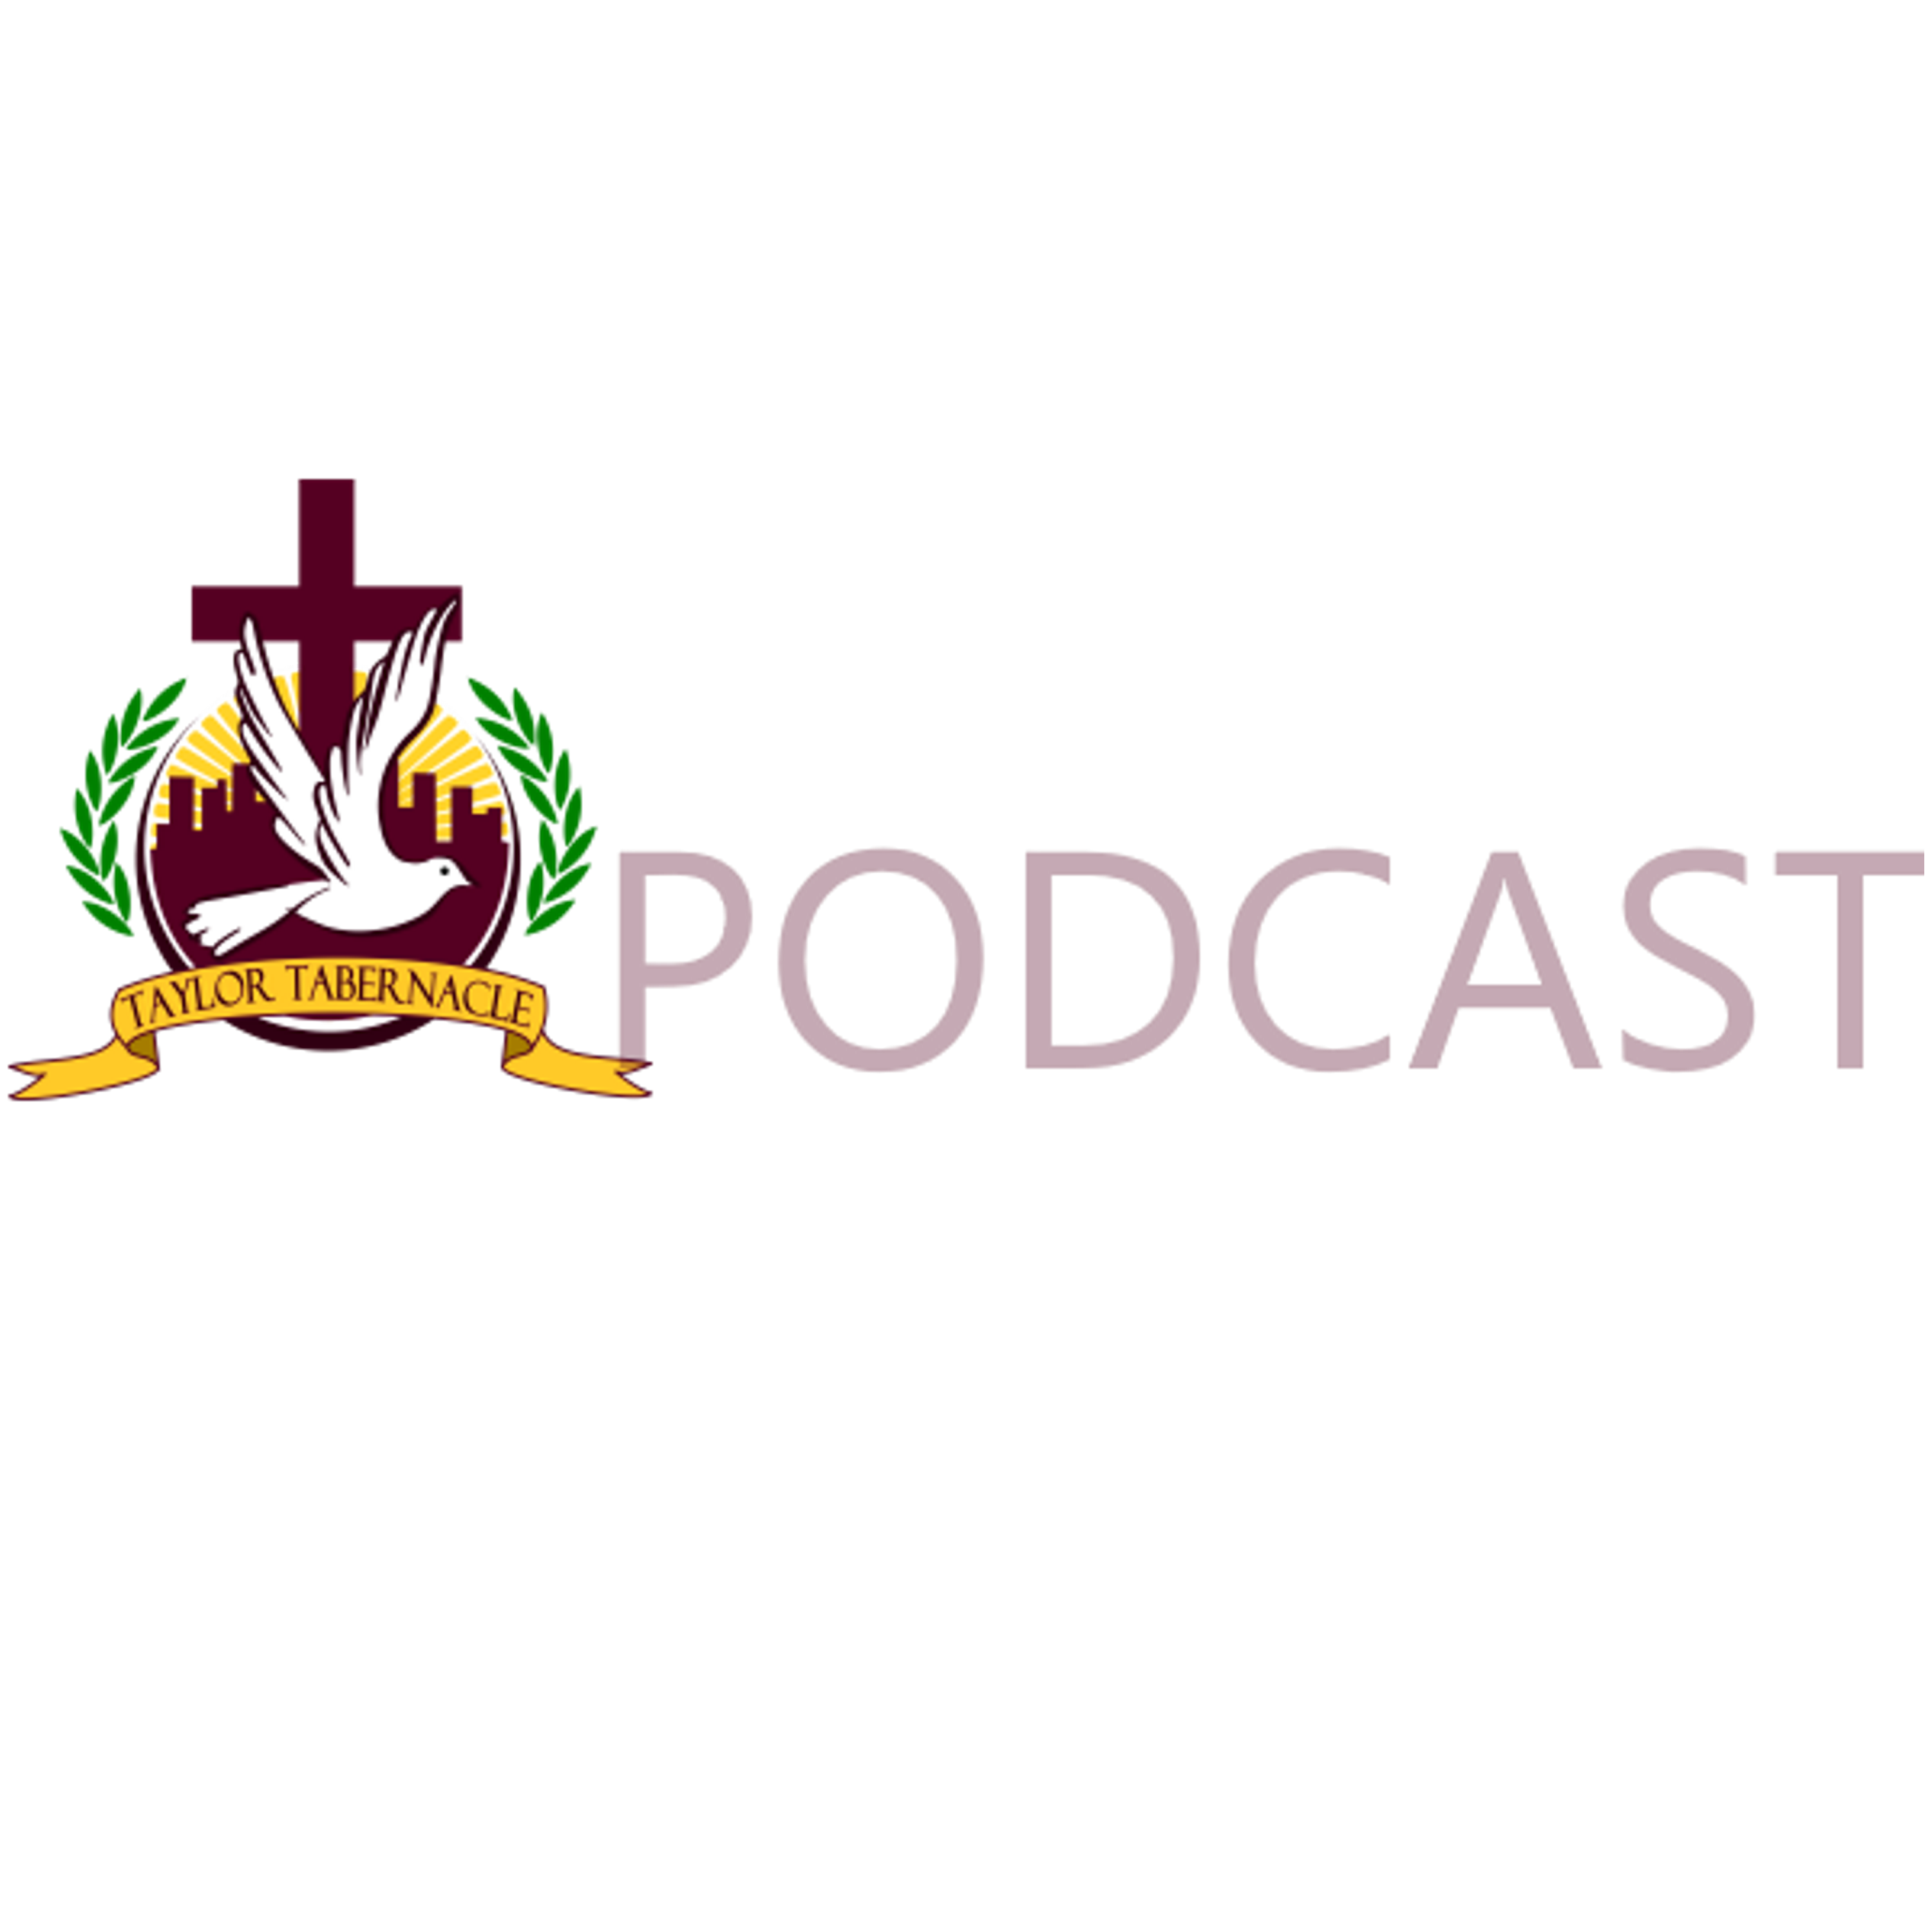 Taylor Tabernacle Podcast